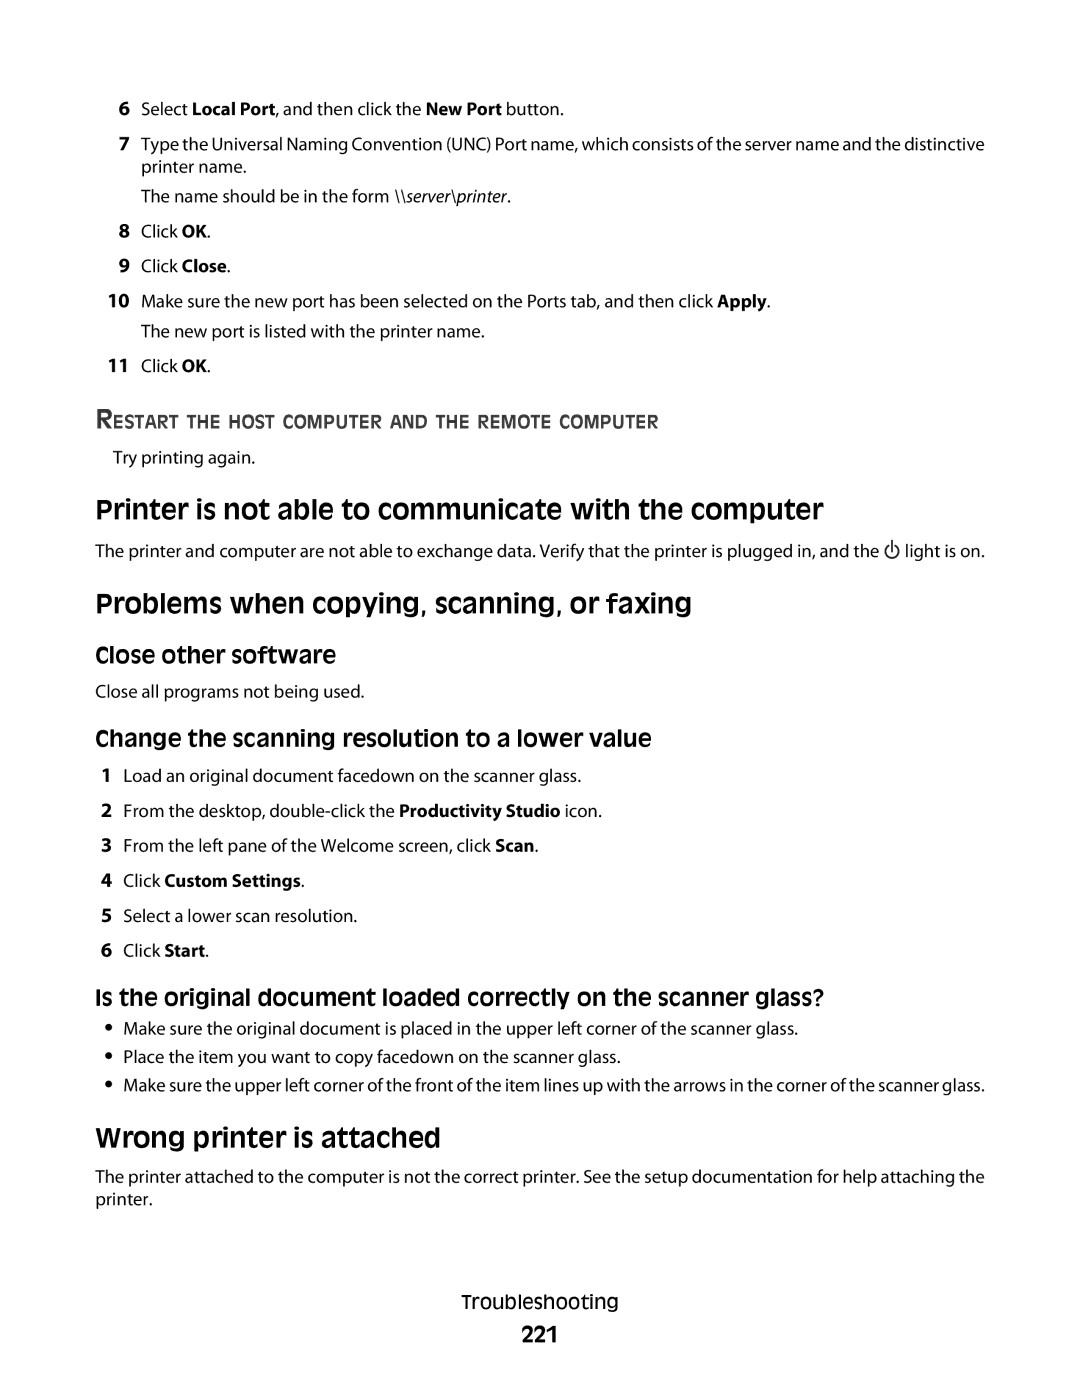 Lexmark 9500 Series manual Printer is not able to communicate with the computer, Problems when copying, scanning, or faxing 